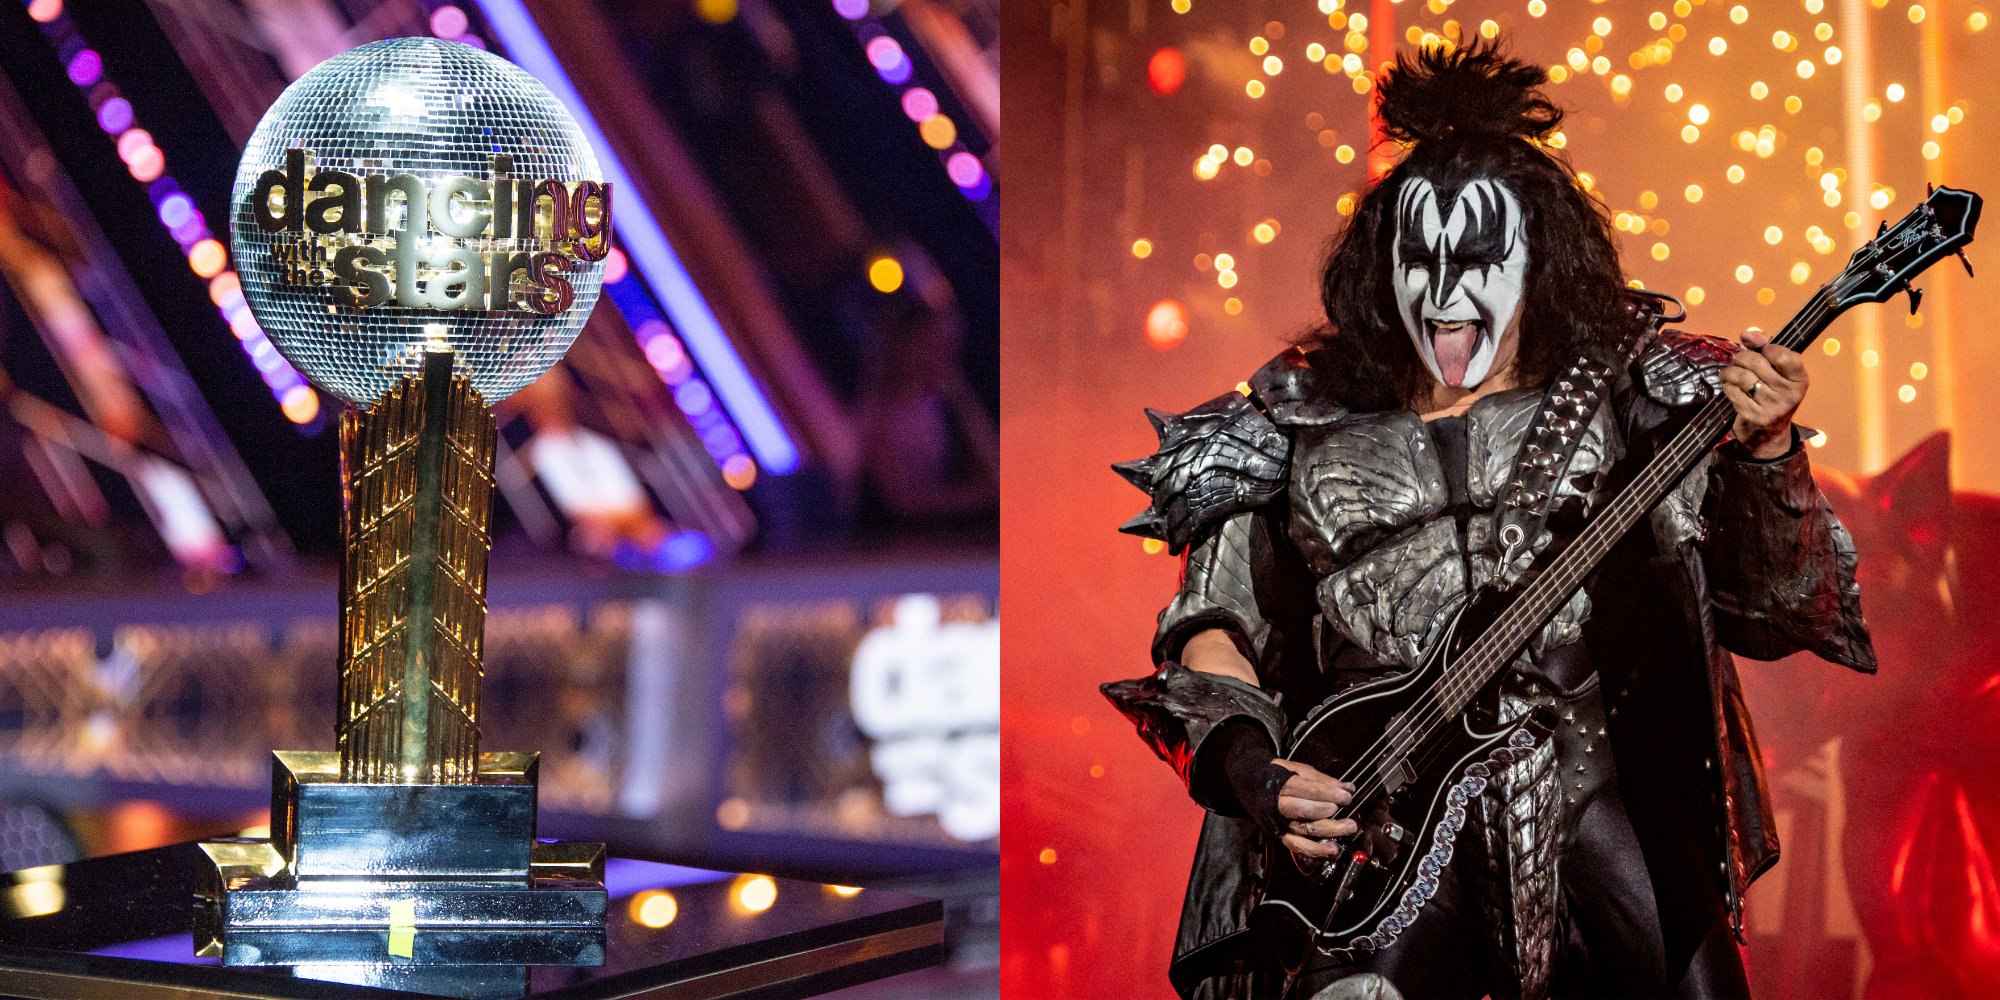 Side by side photos of the 'Dancing with the Stars' mirrorball and KISS bassist Gene Simmons.